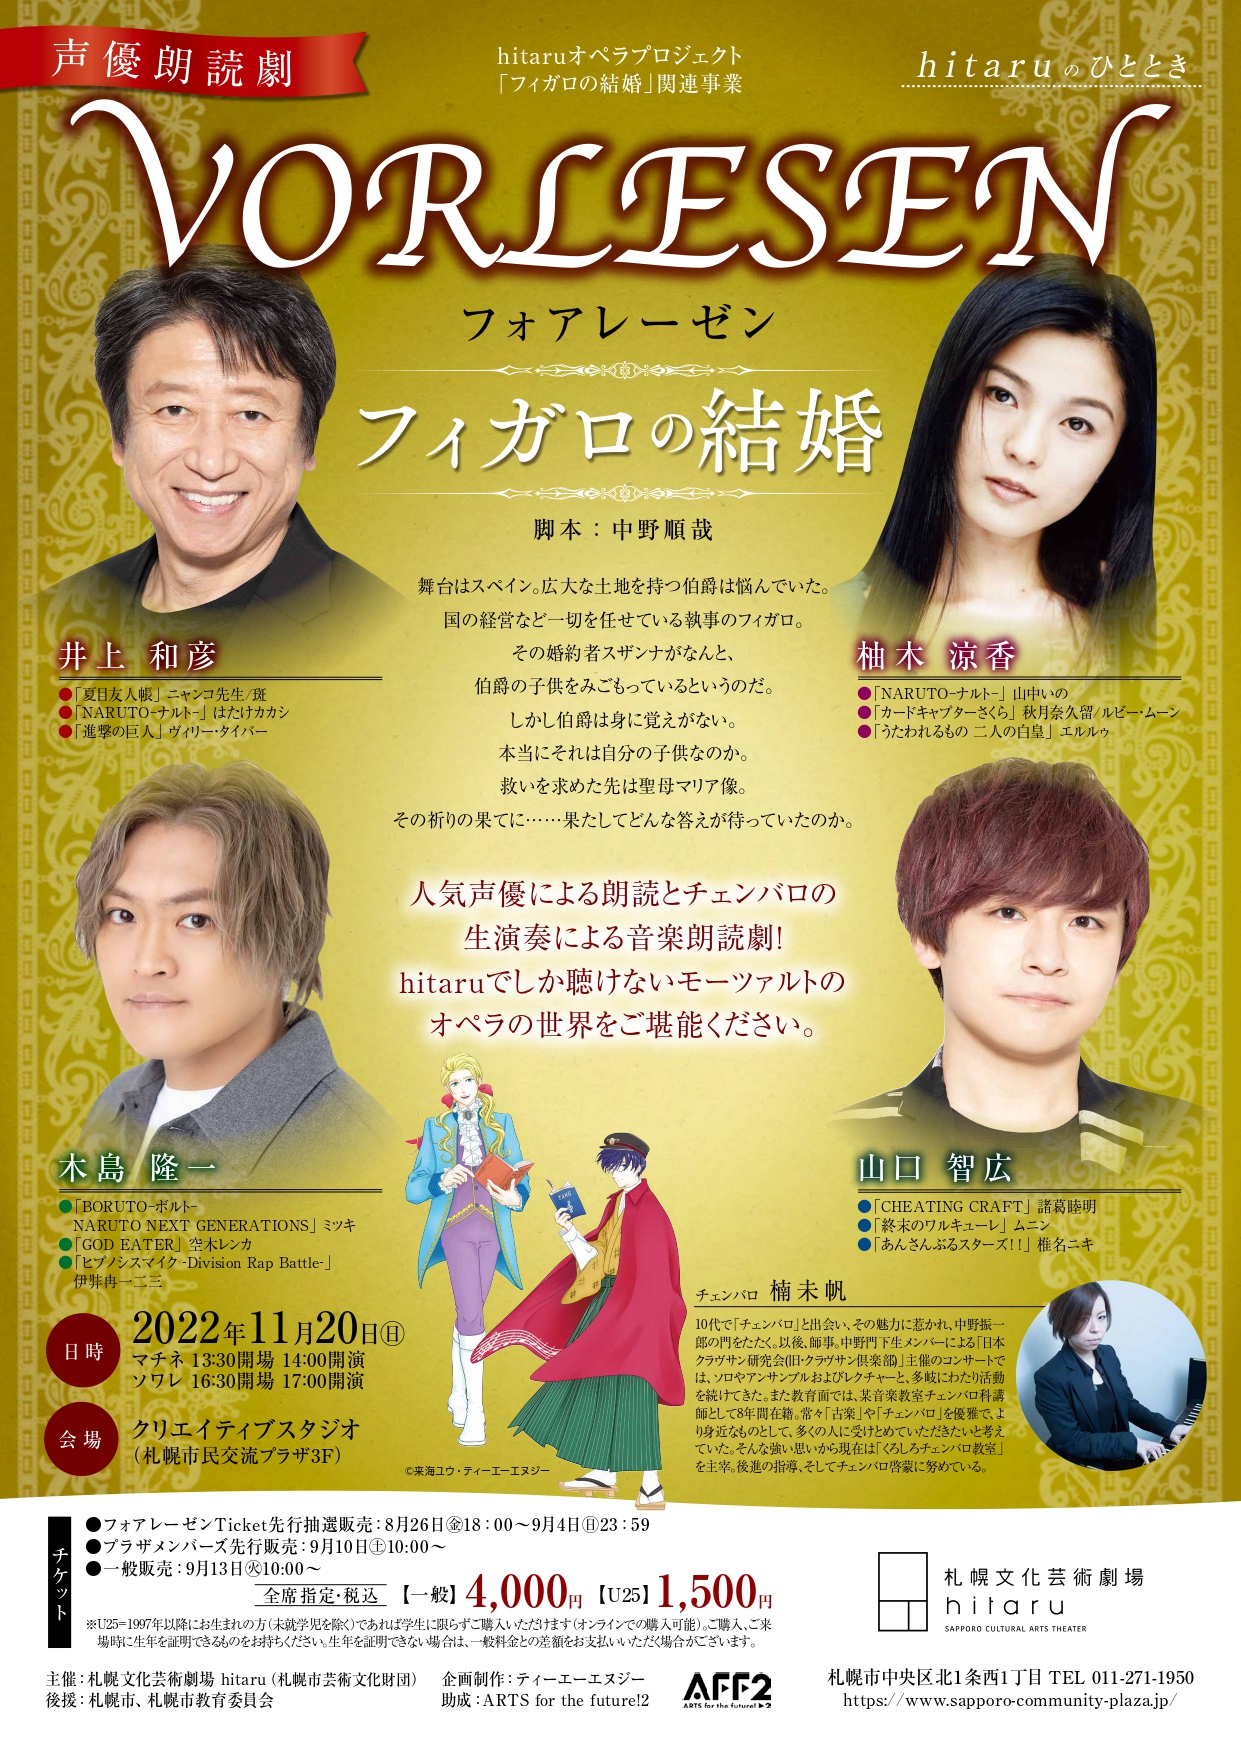 Event related to the hitaru Opera Project “The Marriage of Figaro” Moments at hitaru: A Theatrical Reading of “The Marriage of Figaro” by the Vorlesen Voice Actors image